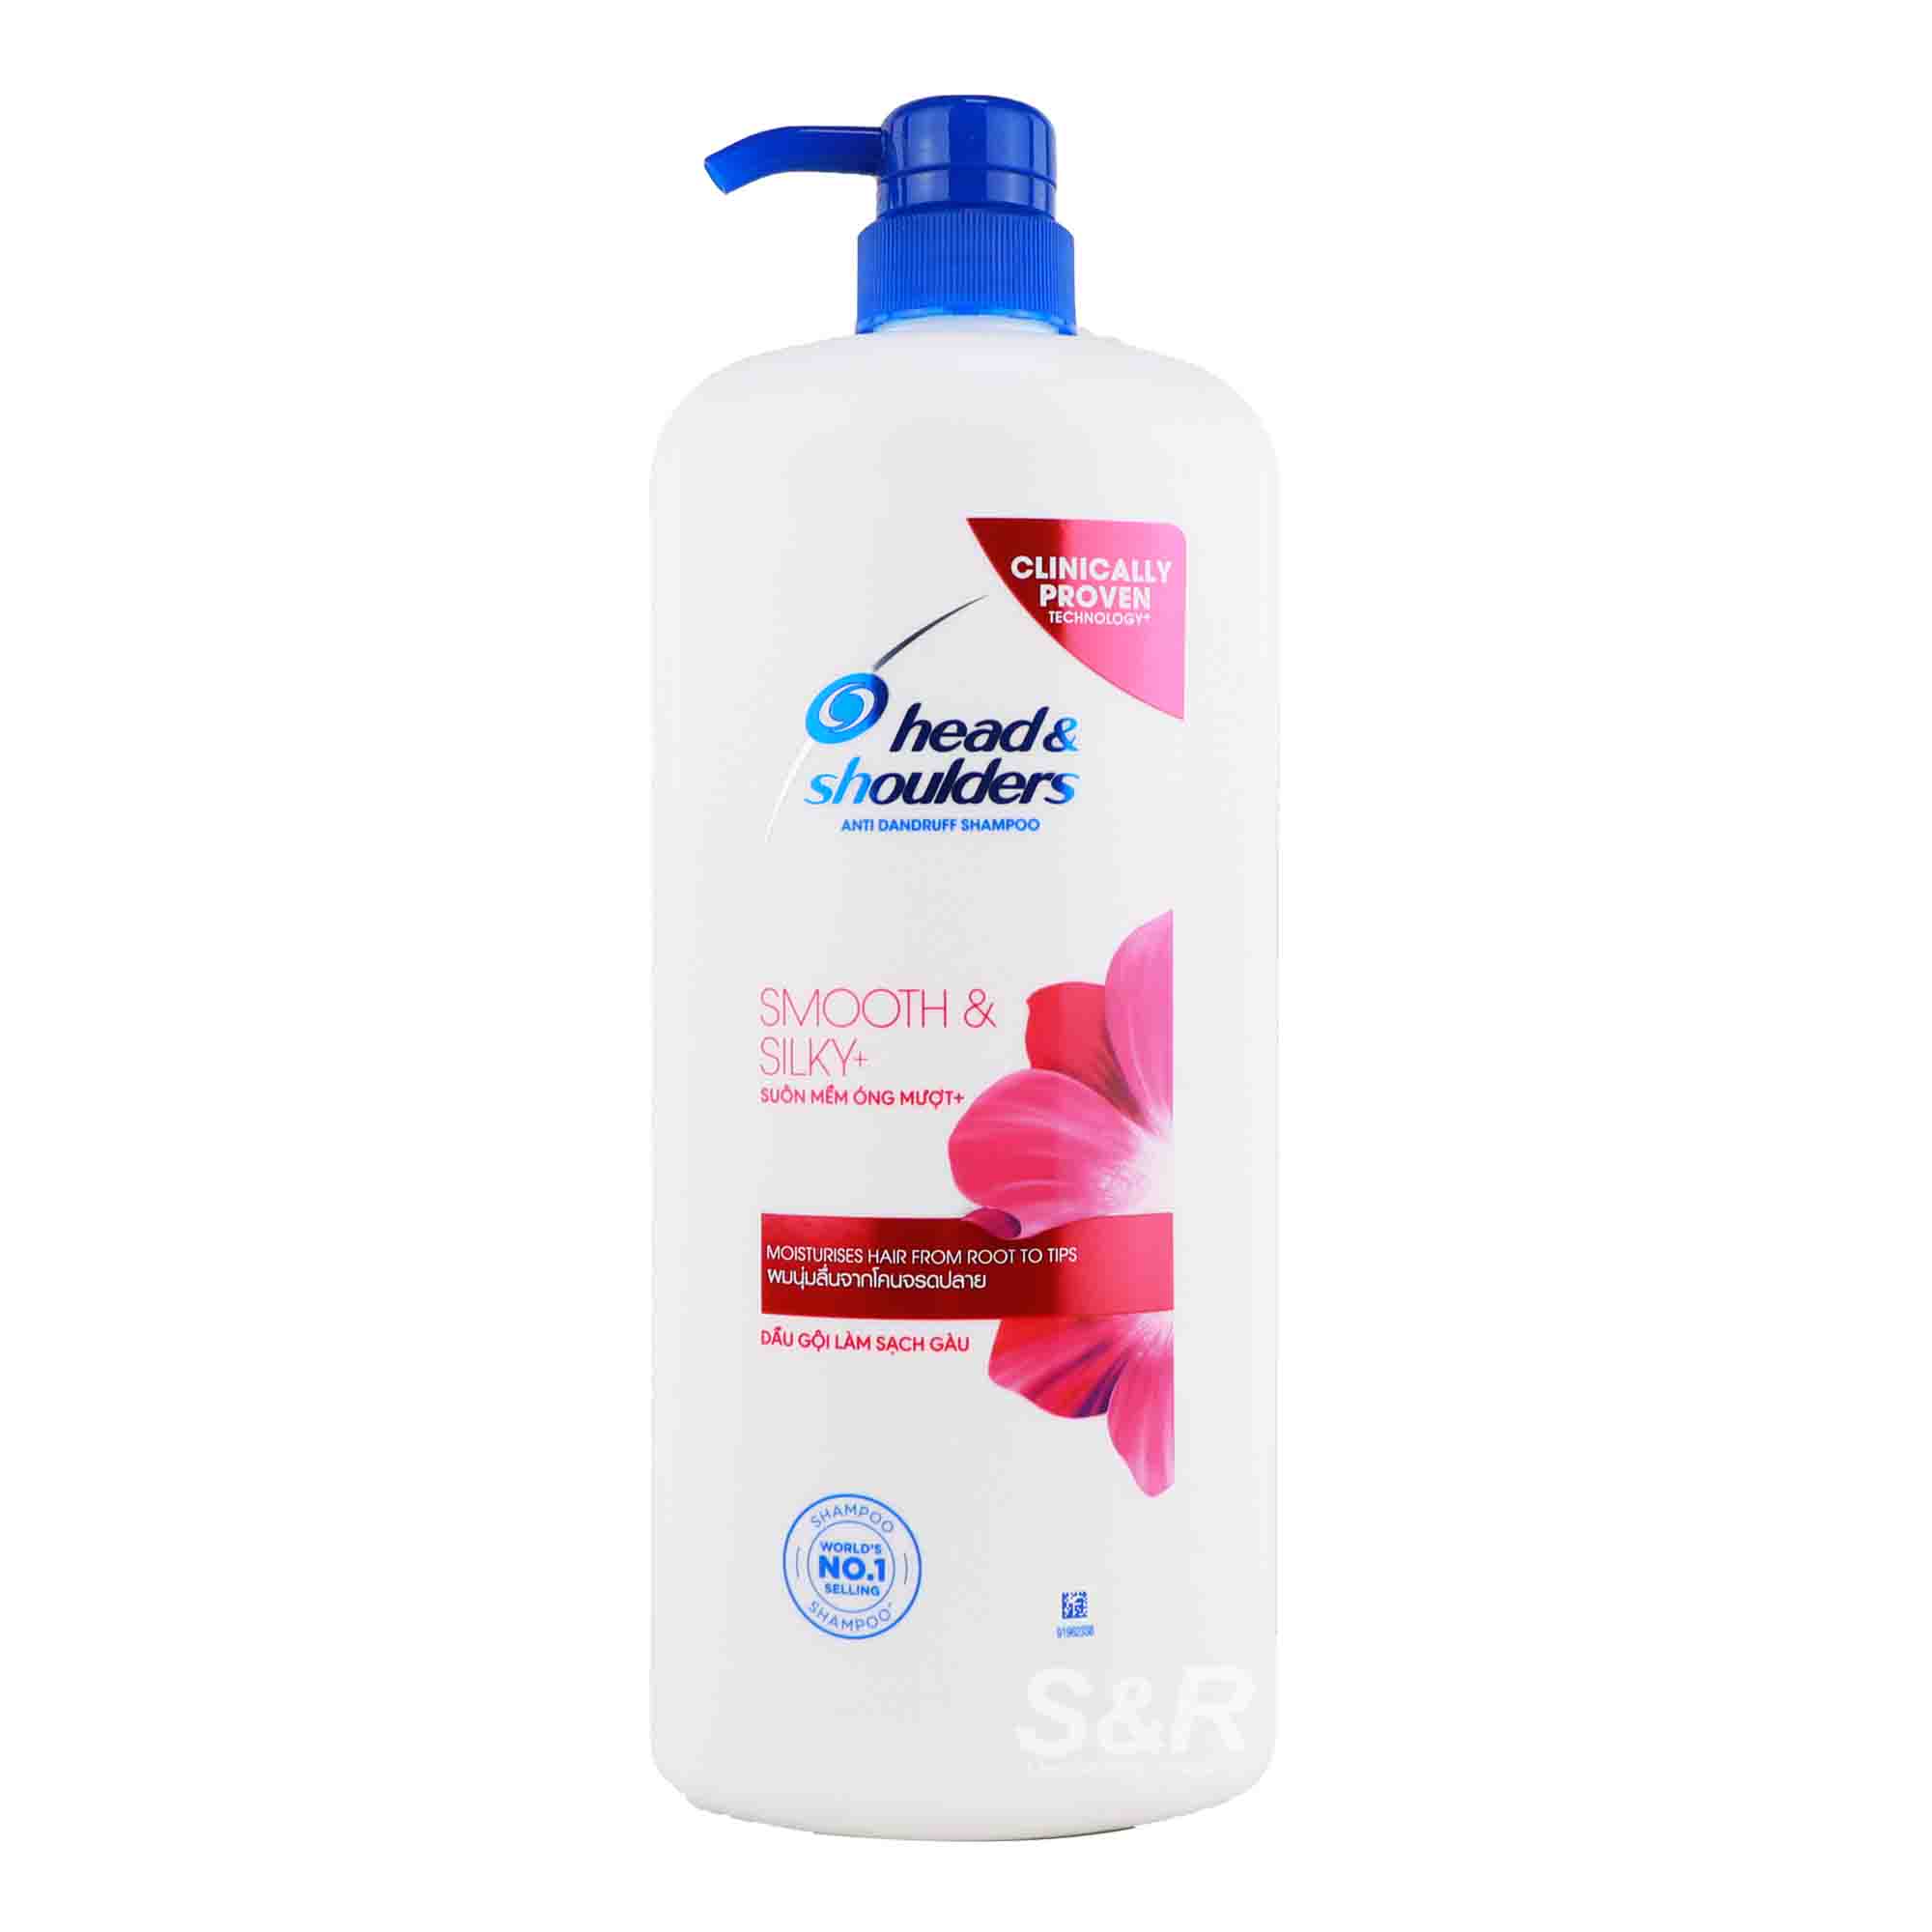 Head & Shoulders Smooth and Silky Shampoo 1.2L